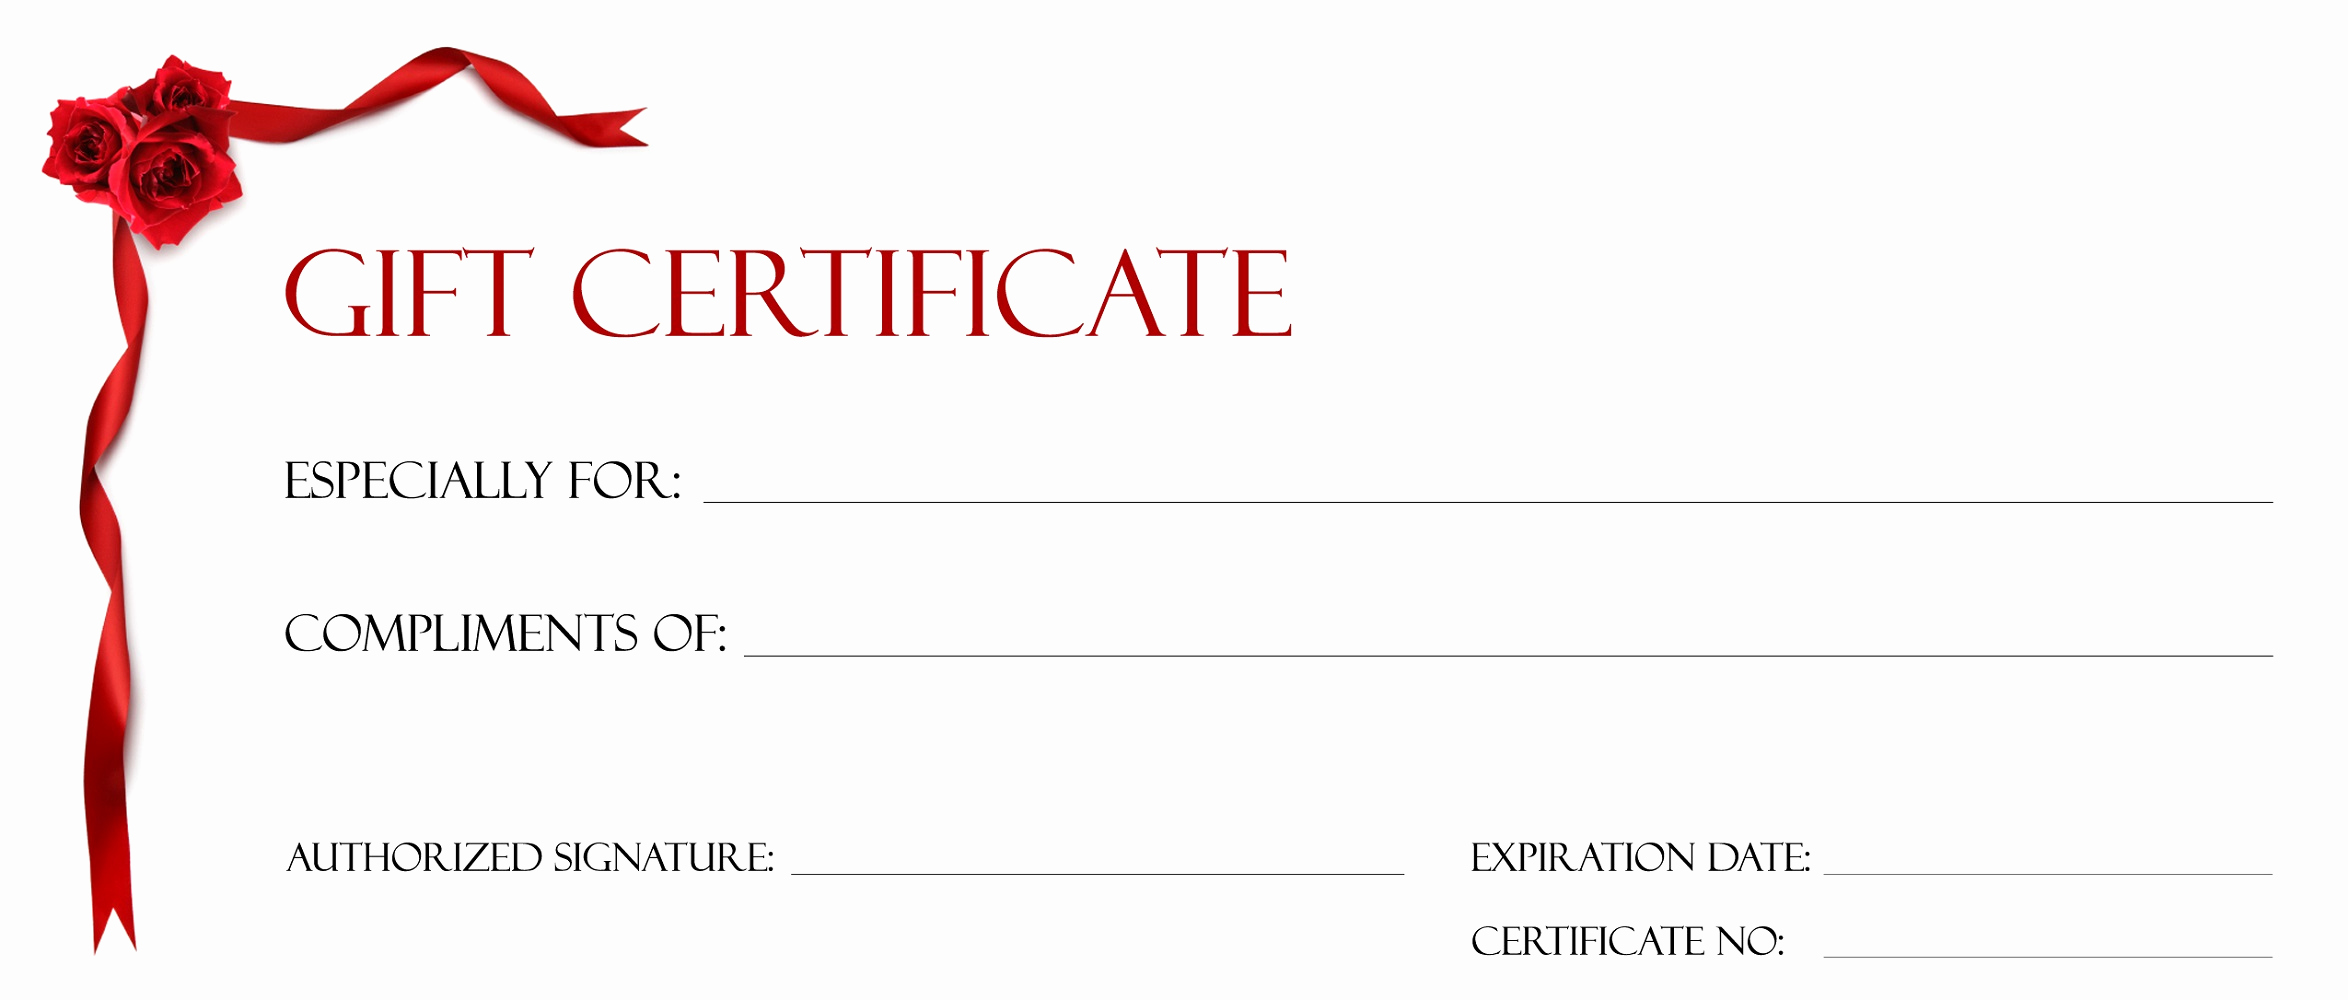 Template for A Gift Certificate Elegant Gift Certificate Templates to Print